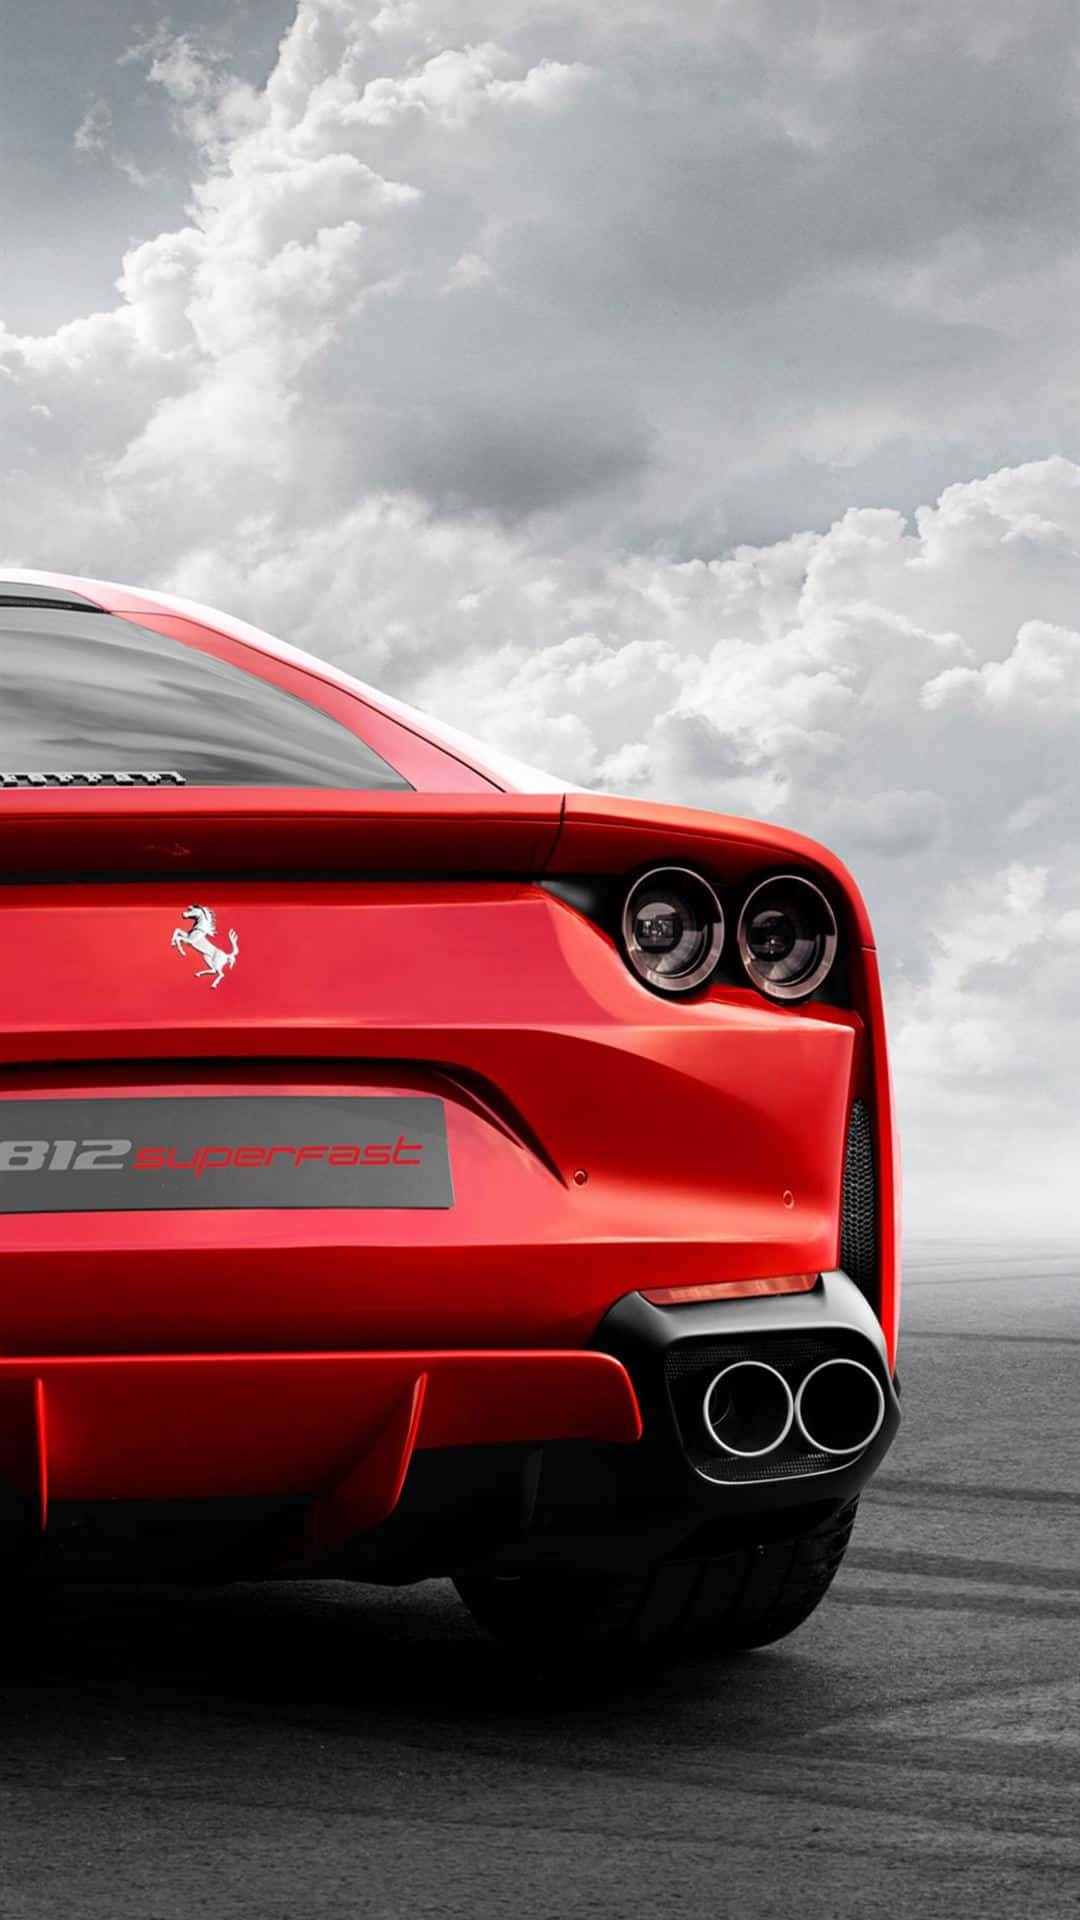 Bring the roar of speed to your X with Ferrari style Wallpaper